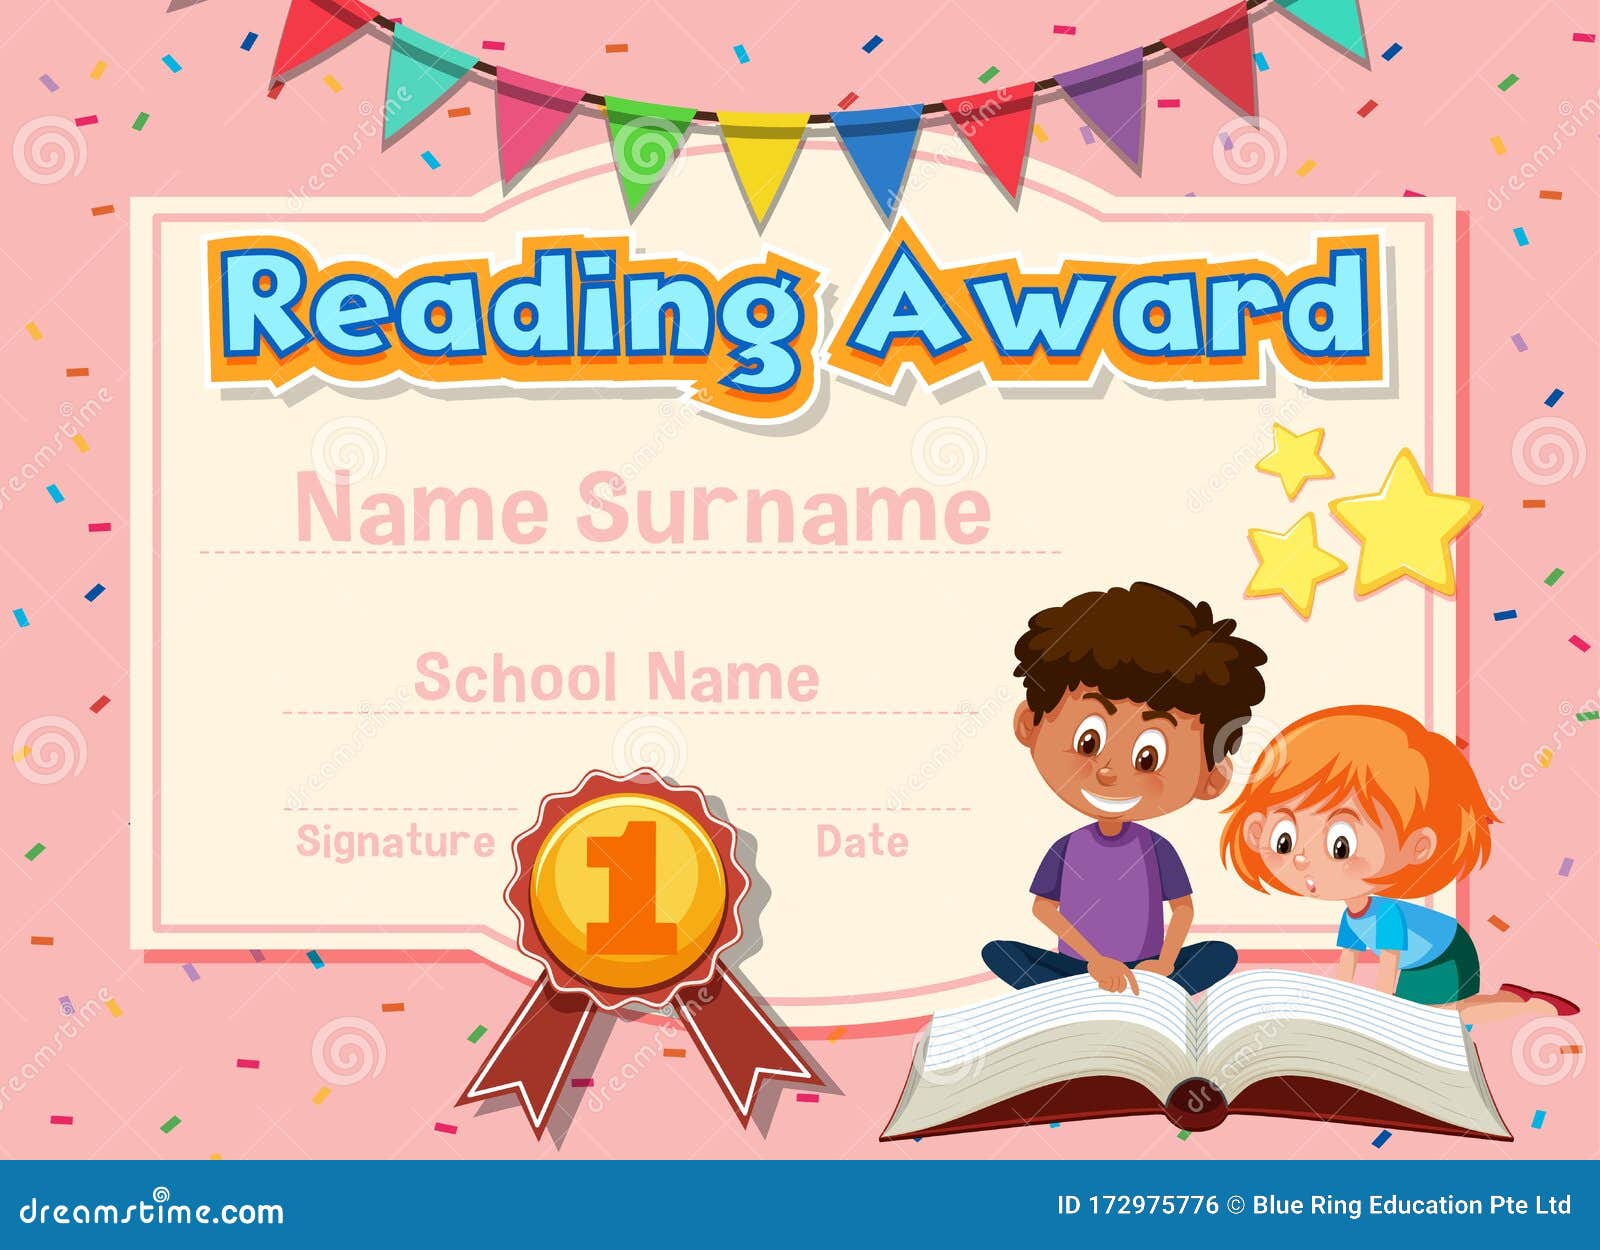 Reading certificate